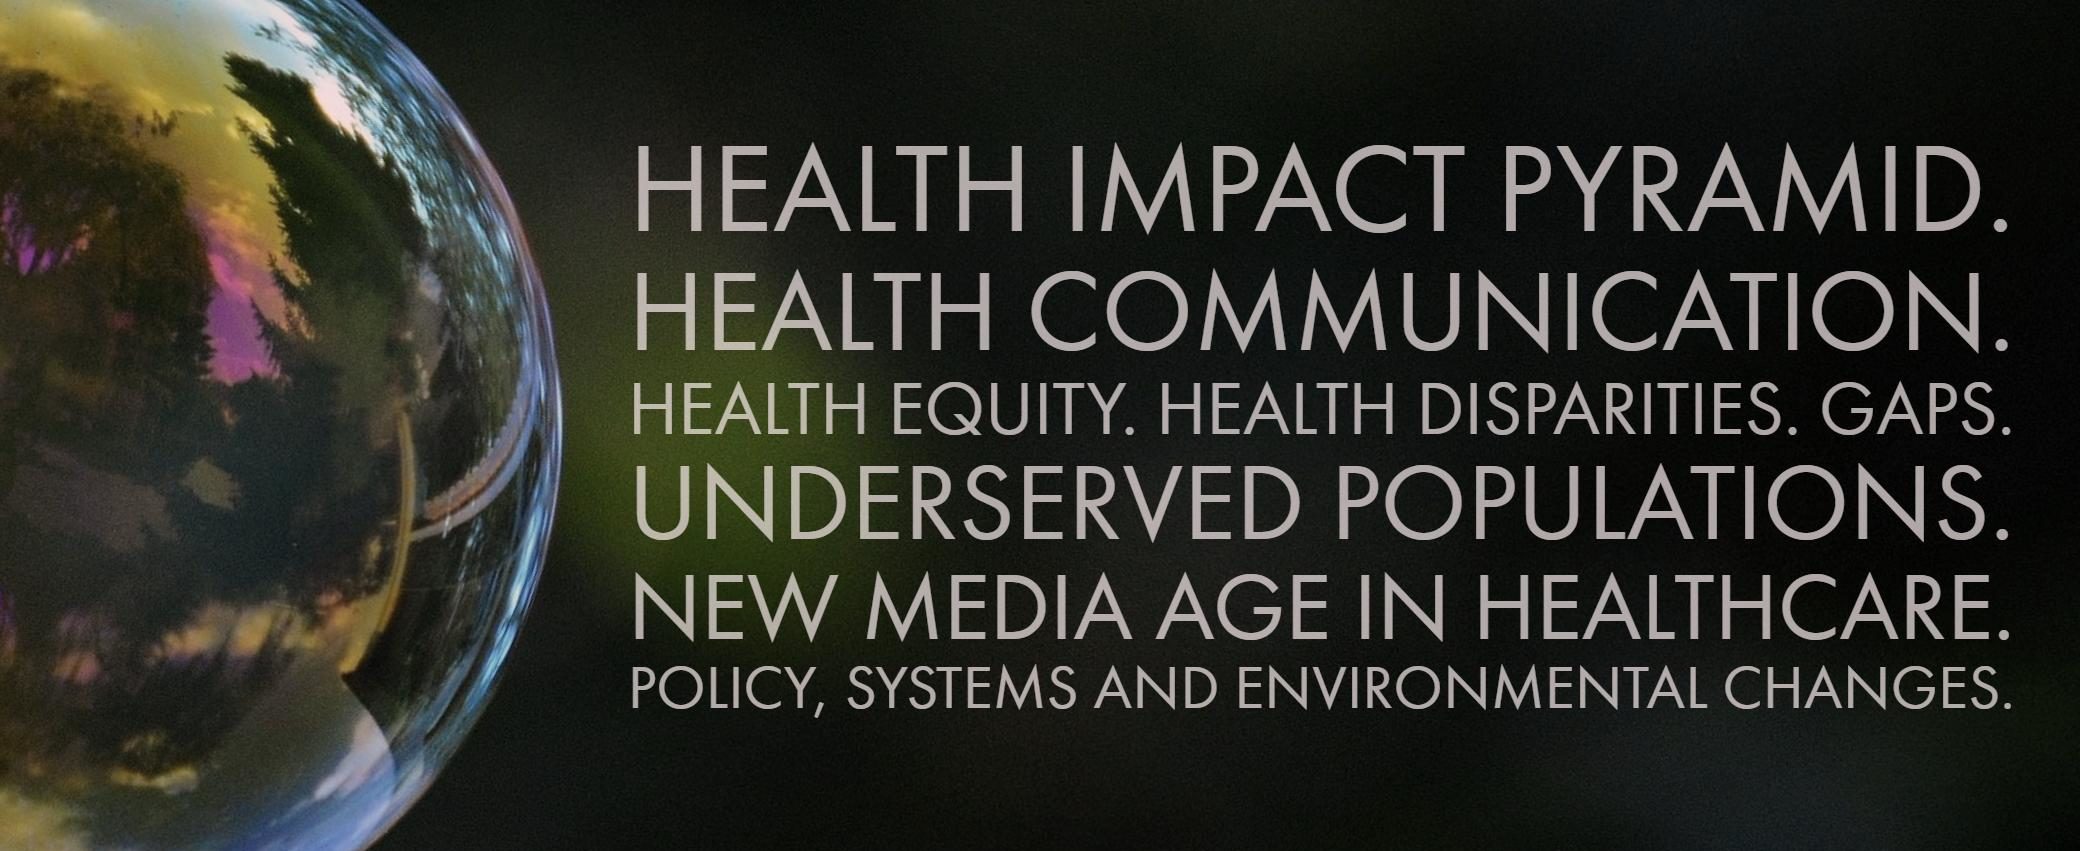 HealthComm’s Role Advancing Health Equity